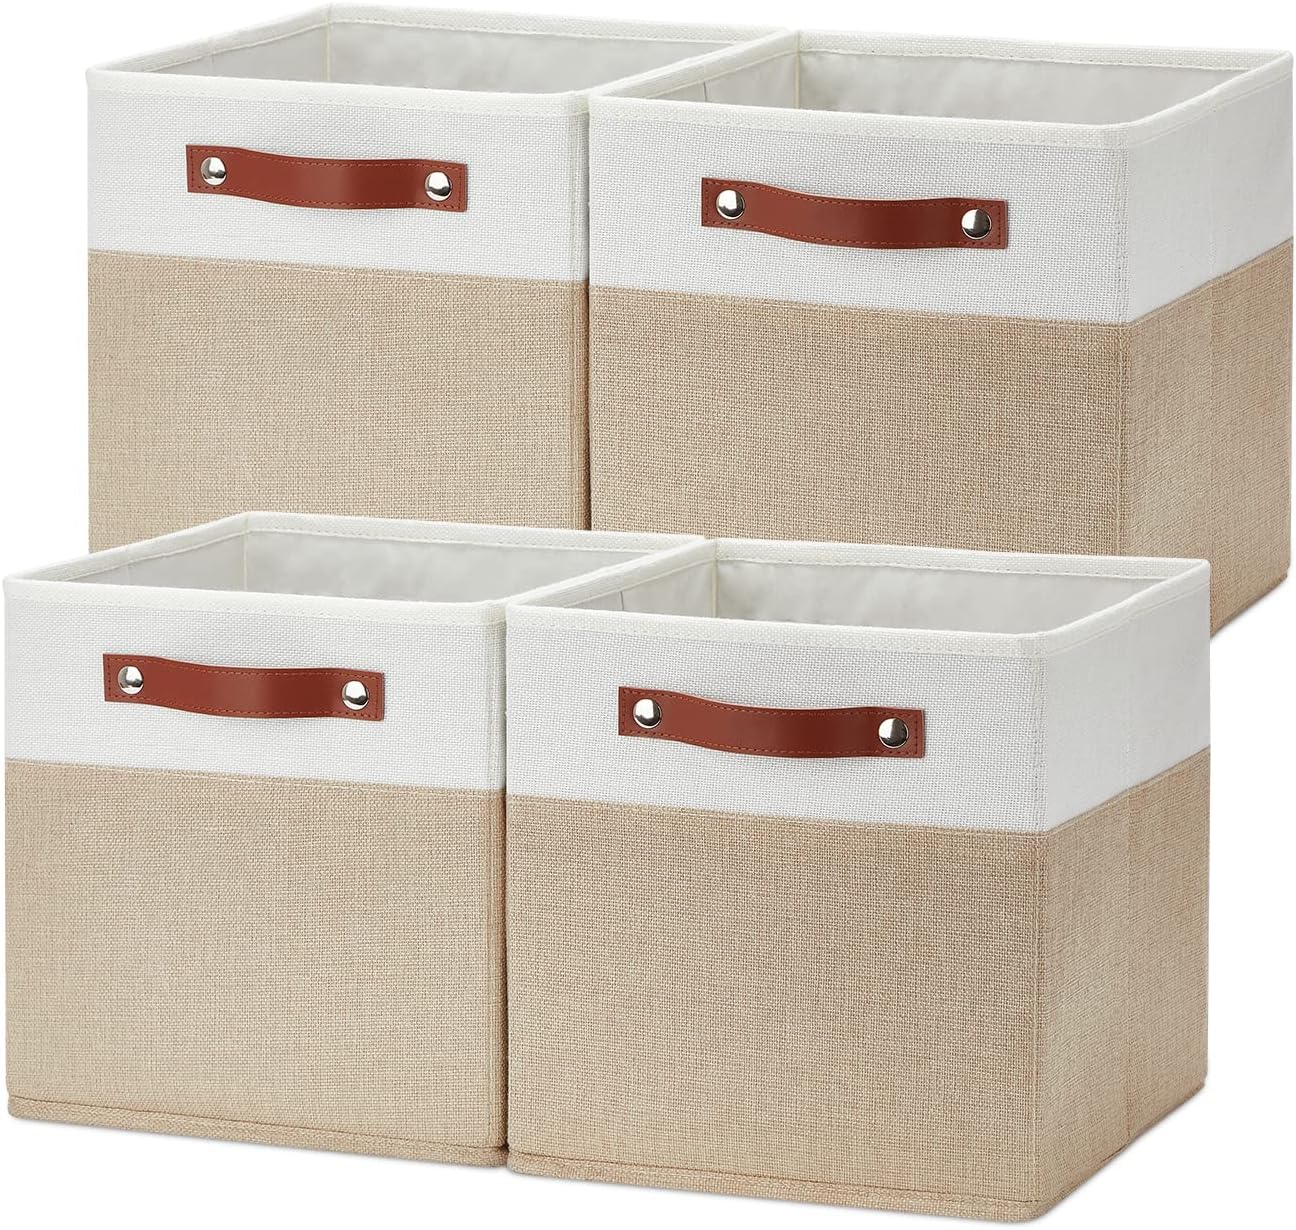 Temary Fabric Storage Cubes Bins, 11 inch Cube Storage Baskets, Foldable Cube Bins Set with Handles, Decorative Storage Boxes for Organizing, Home, Office, Nursery (White & Khaki, 11 x 11 x 11)